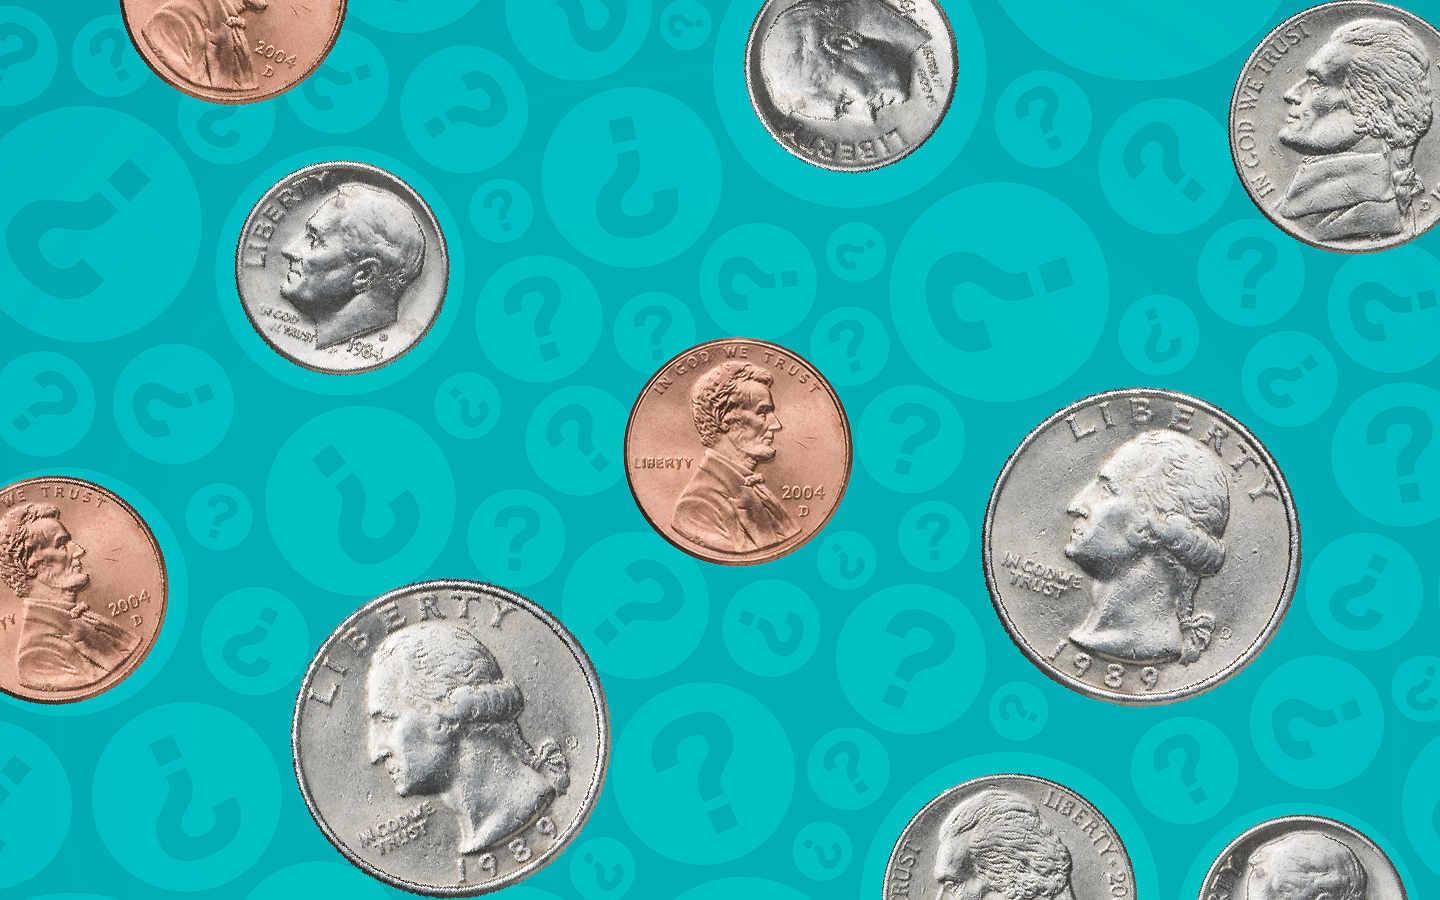 How Much Should You Pay for a Coin?